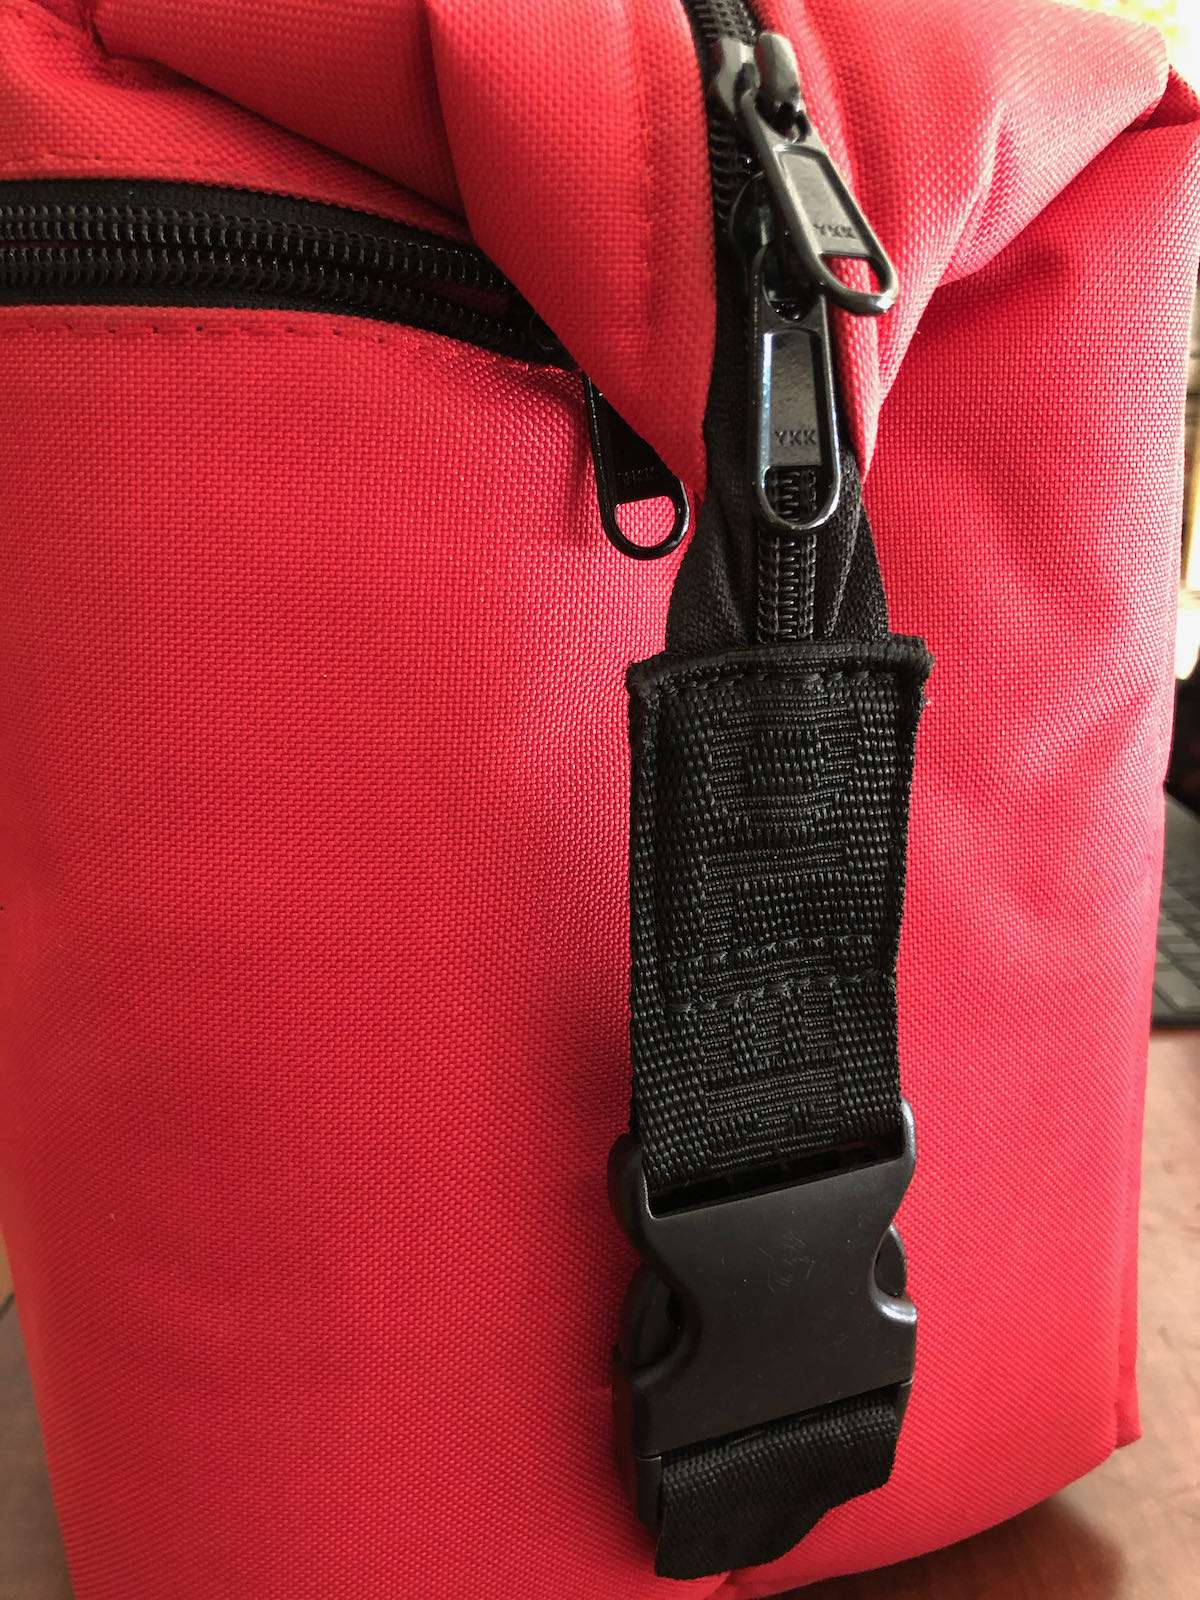 Side buckles fasten down on AO 12 Pack Cooler for a more compact, efficient design.